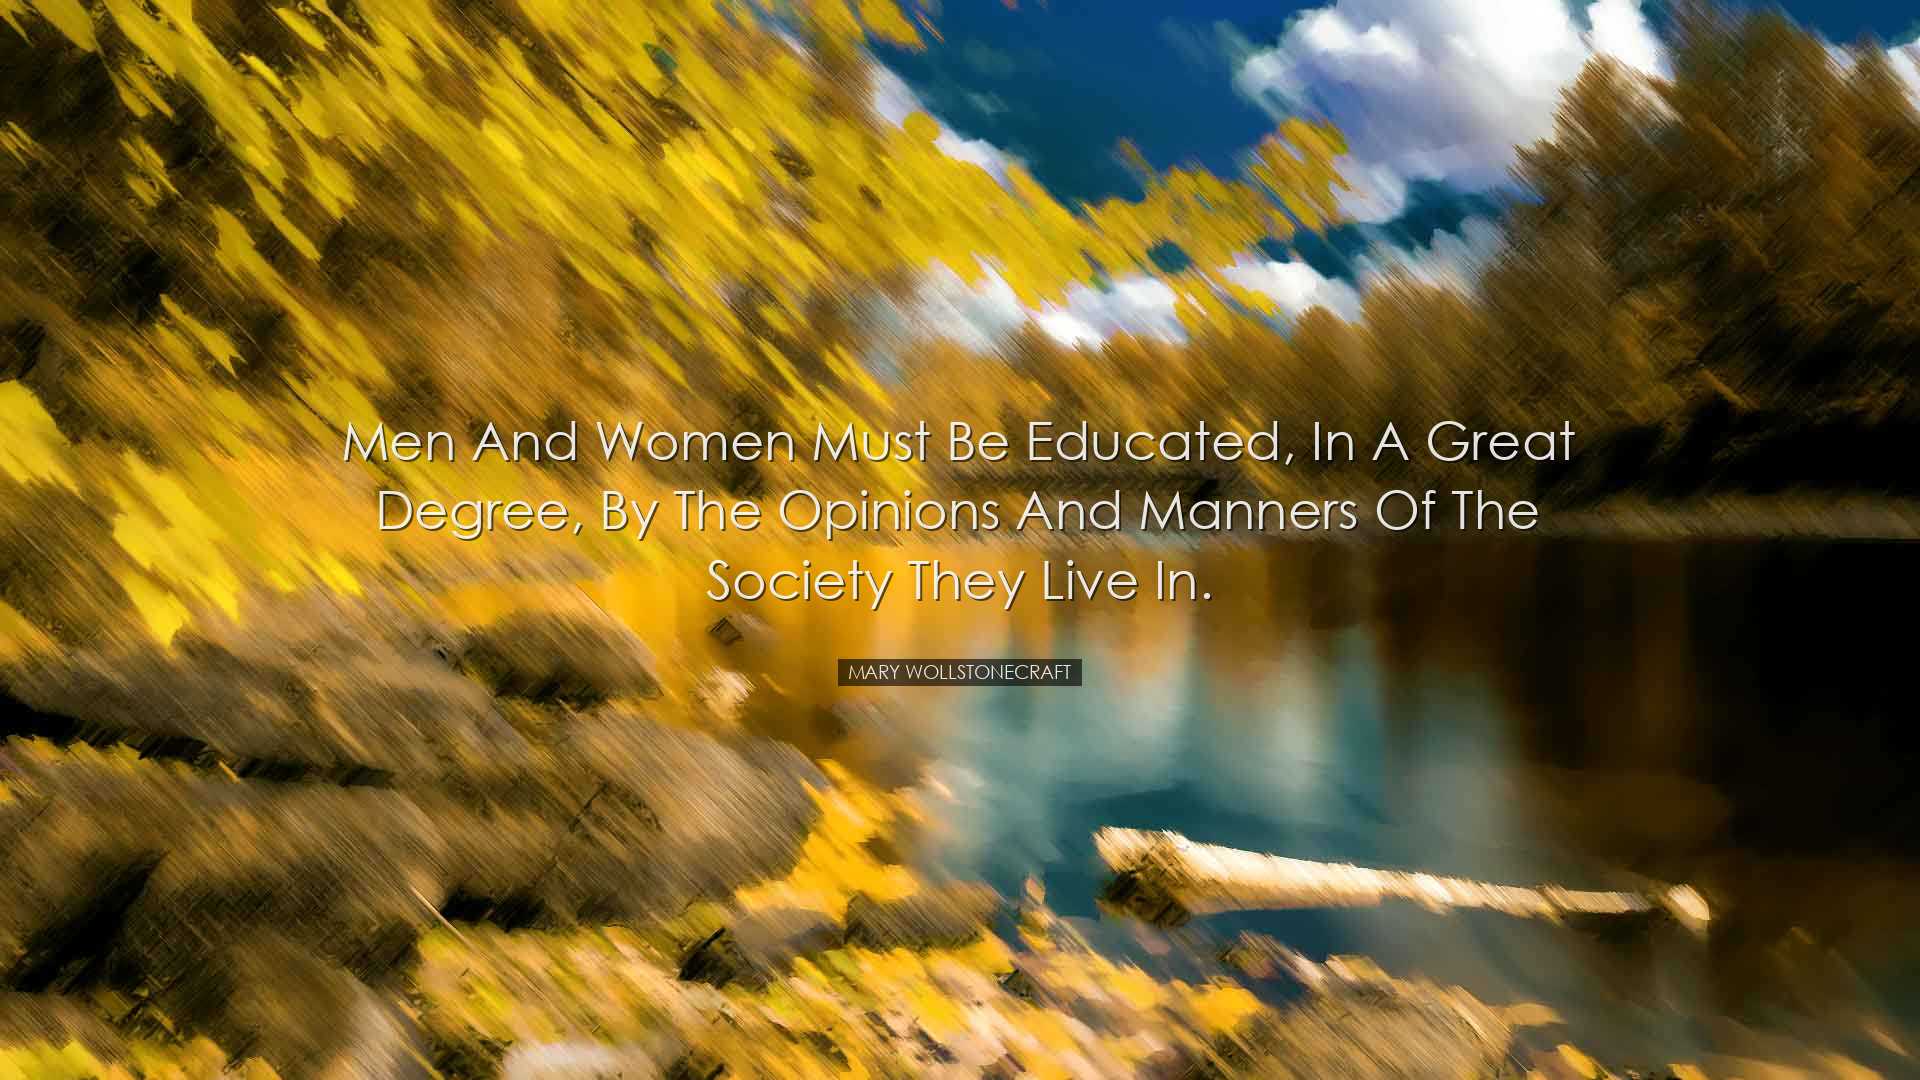 Men and women must be educated, in a great degree, by the opinions